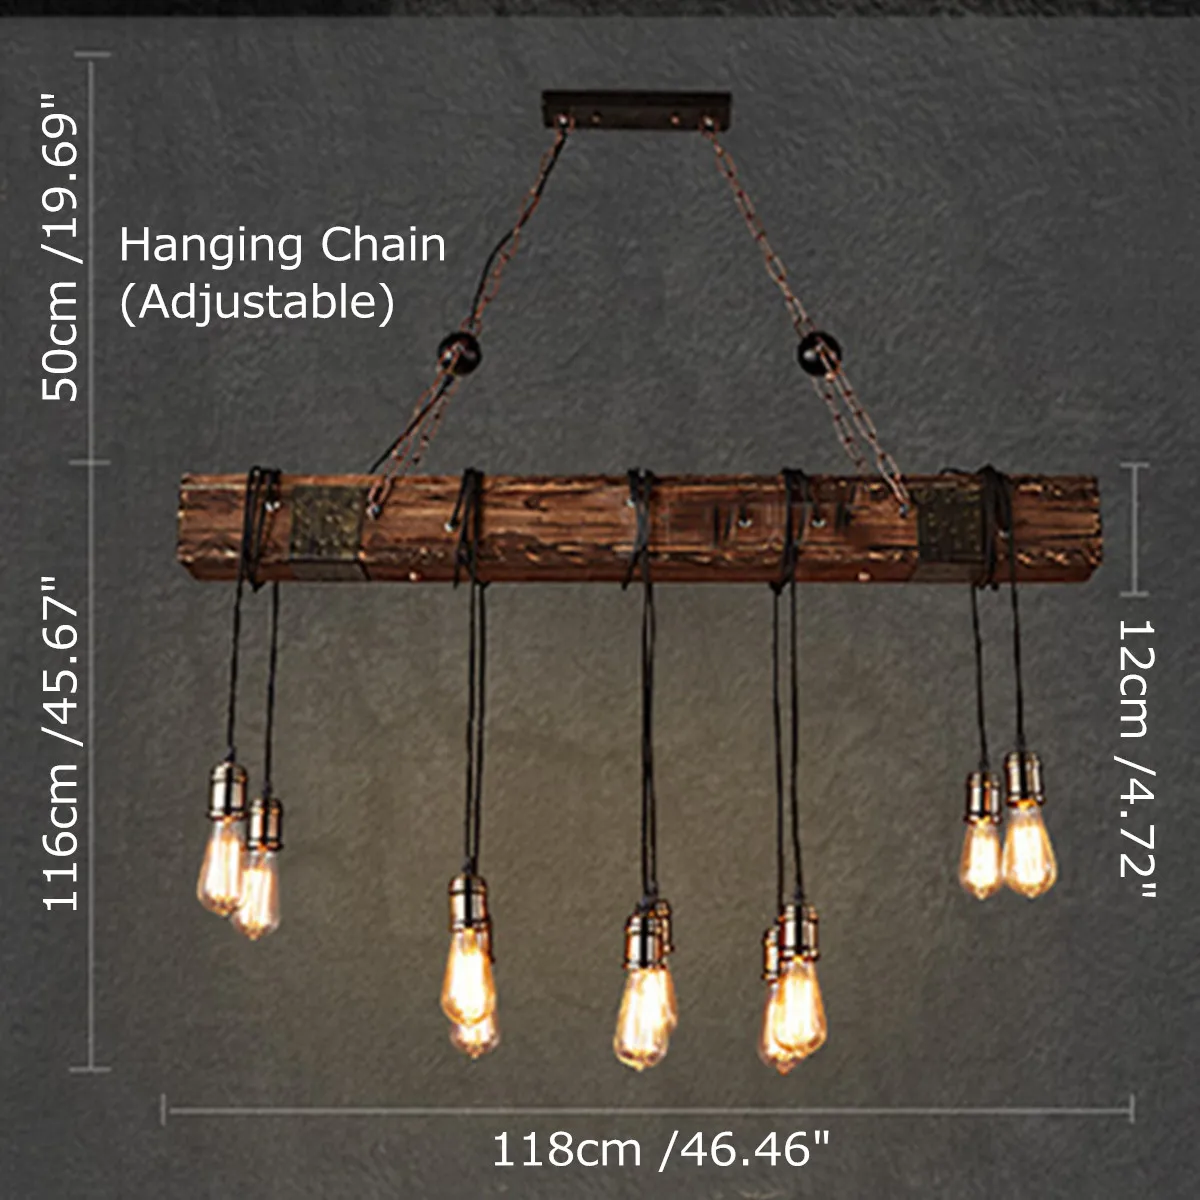 Hanging Antique Farmhouse Wood Beam Island with 10 Edison Bulb Home Kitchen Restaurant Decorations